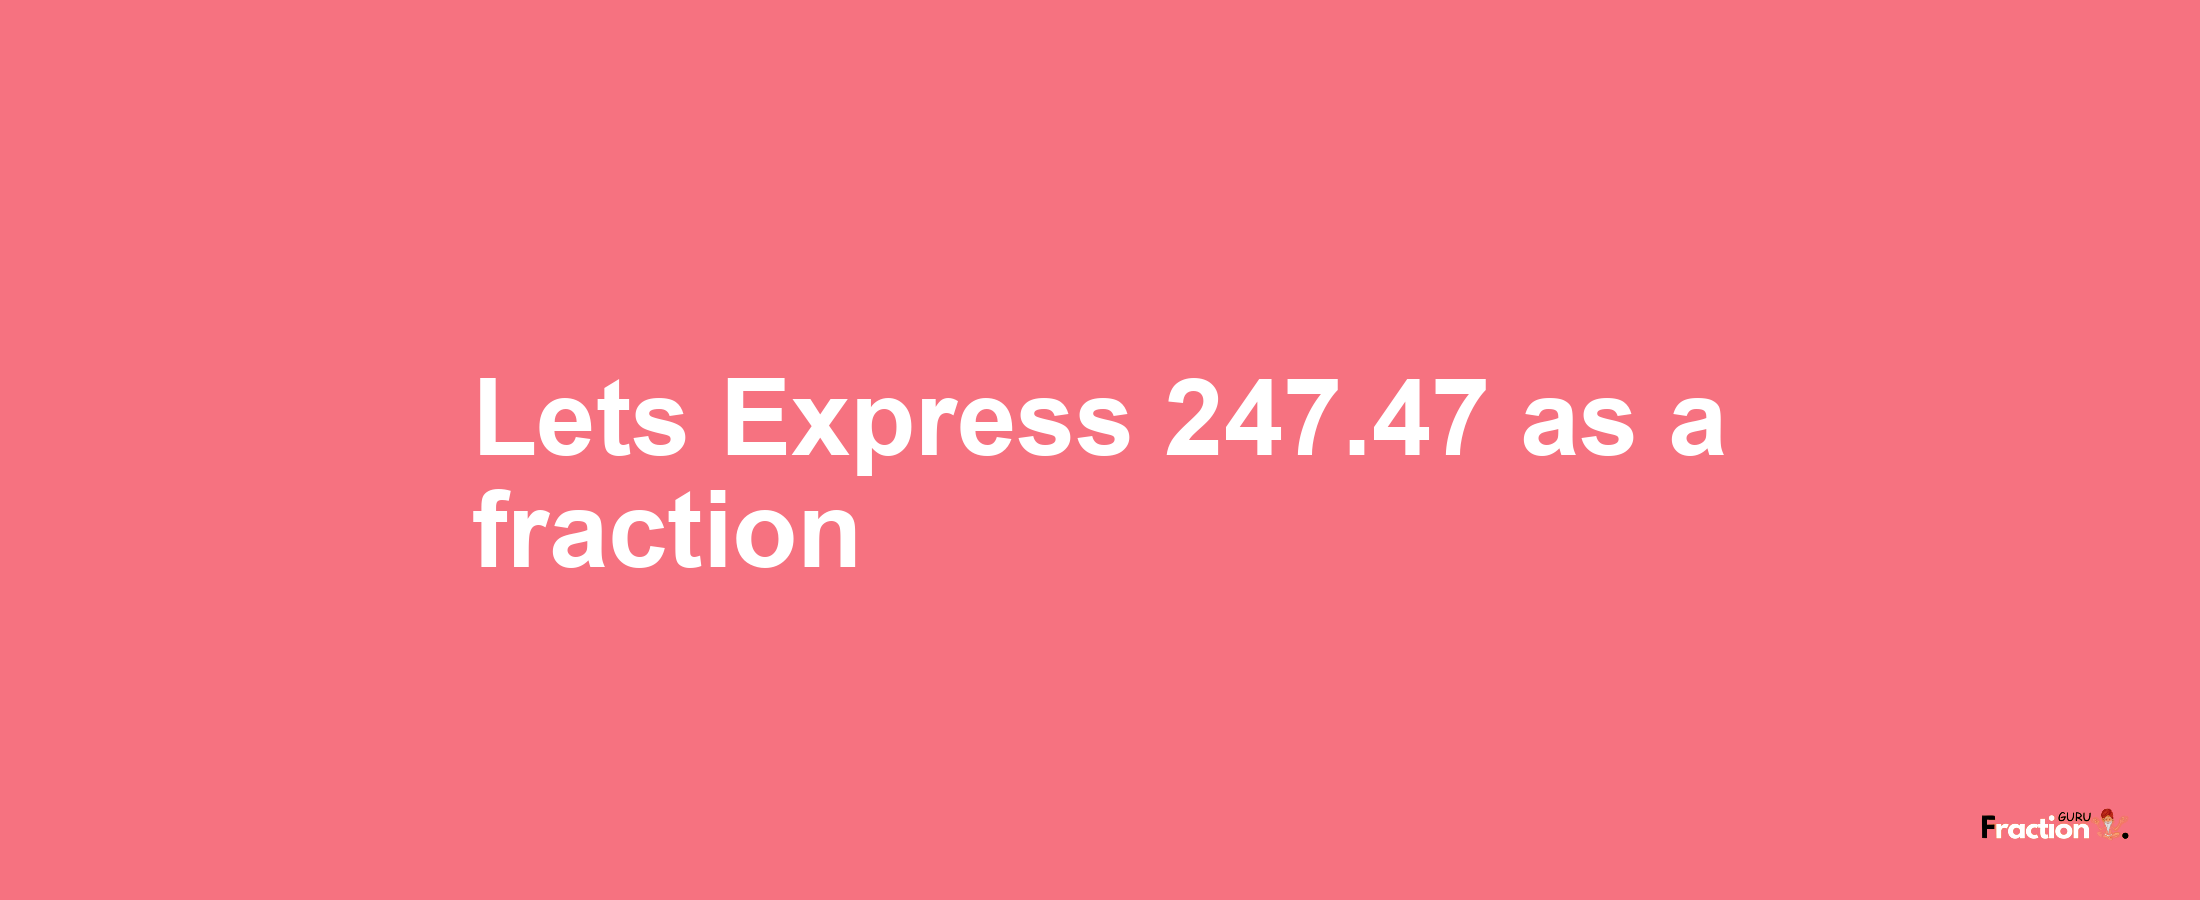 Lets Express 247.47 as afraction